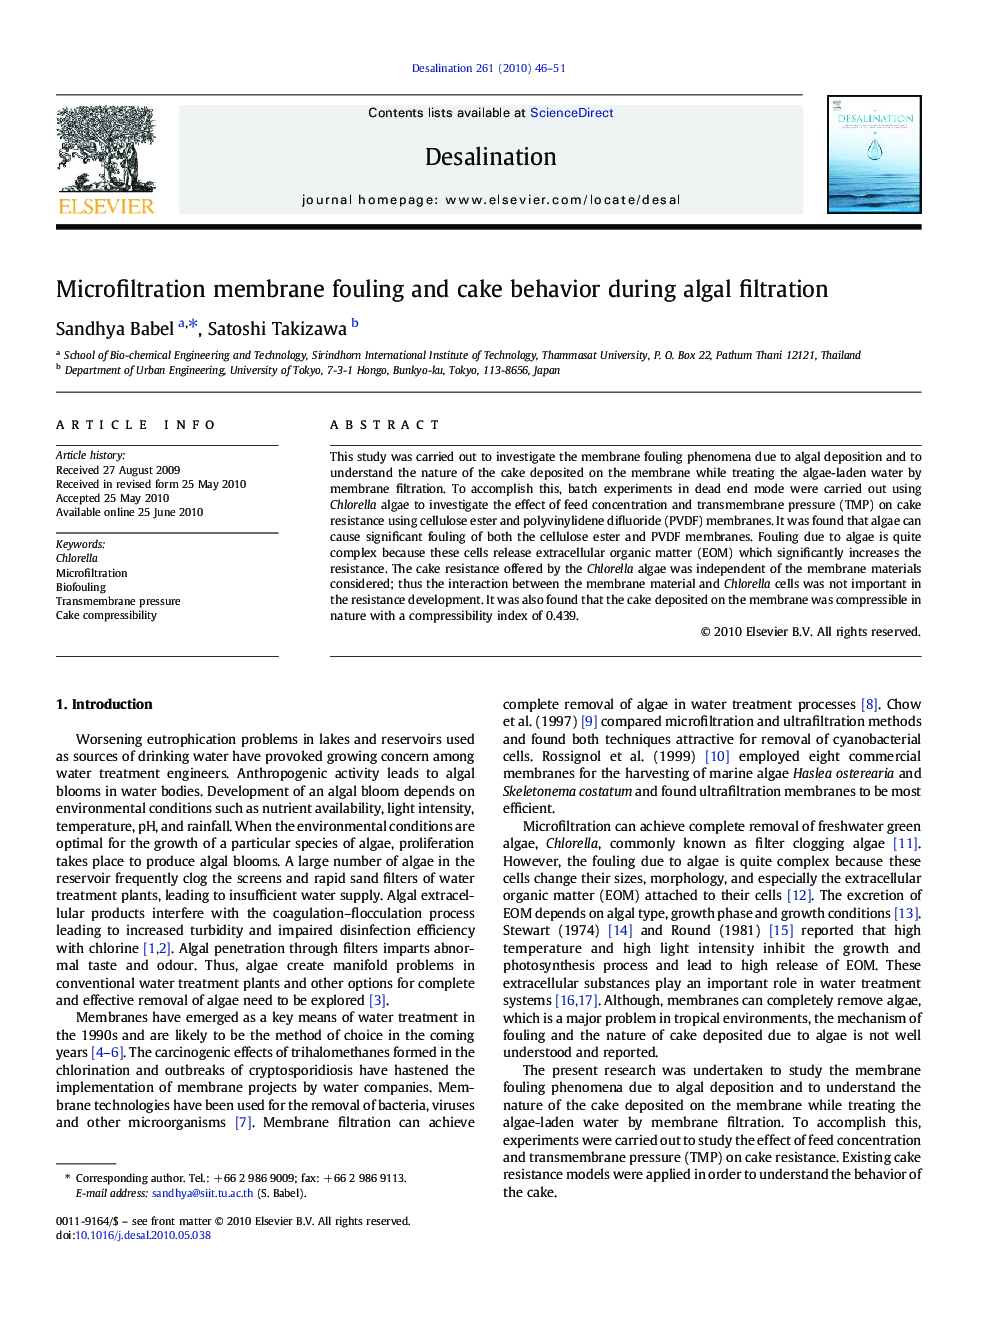 Microfiltration membrane fouling and cake behavior during algal filtration